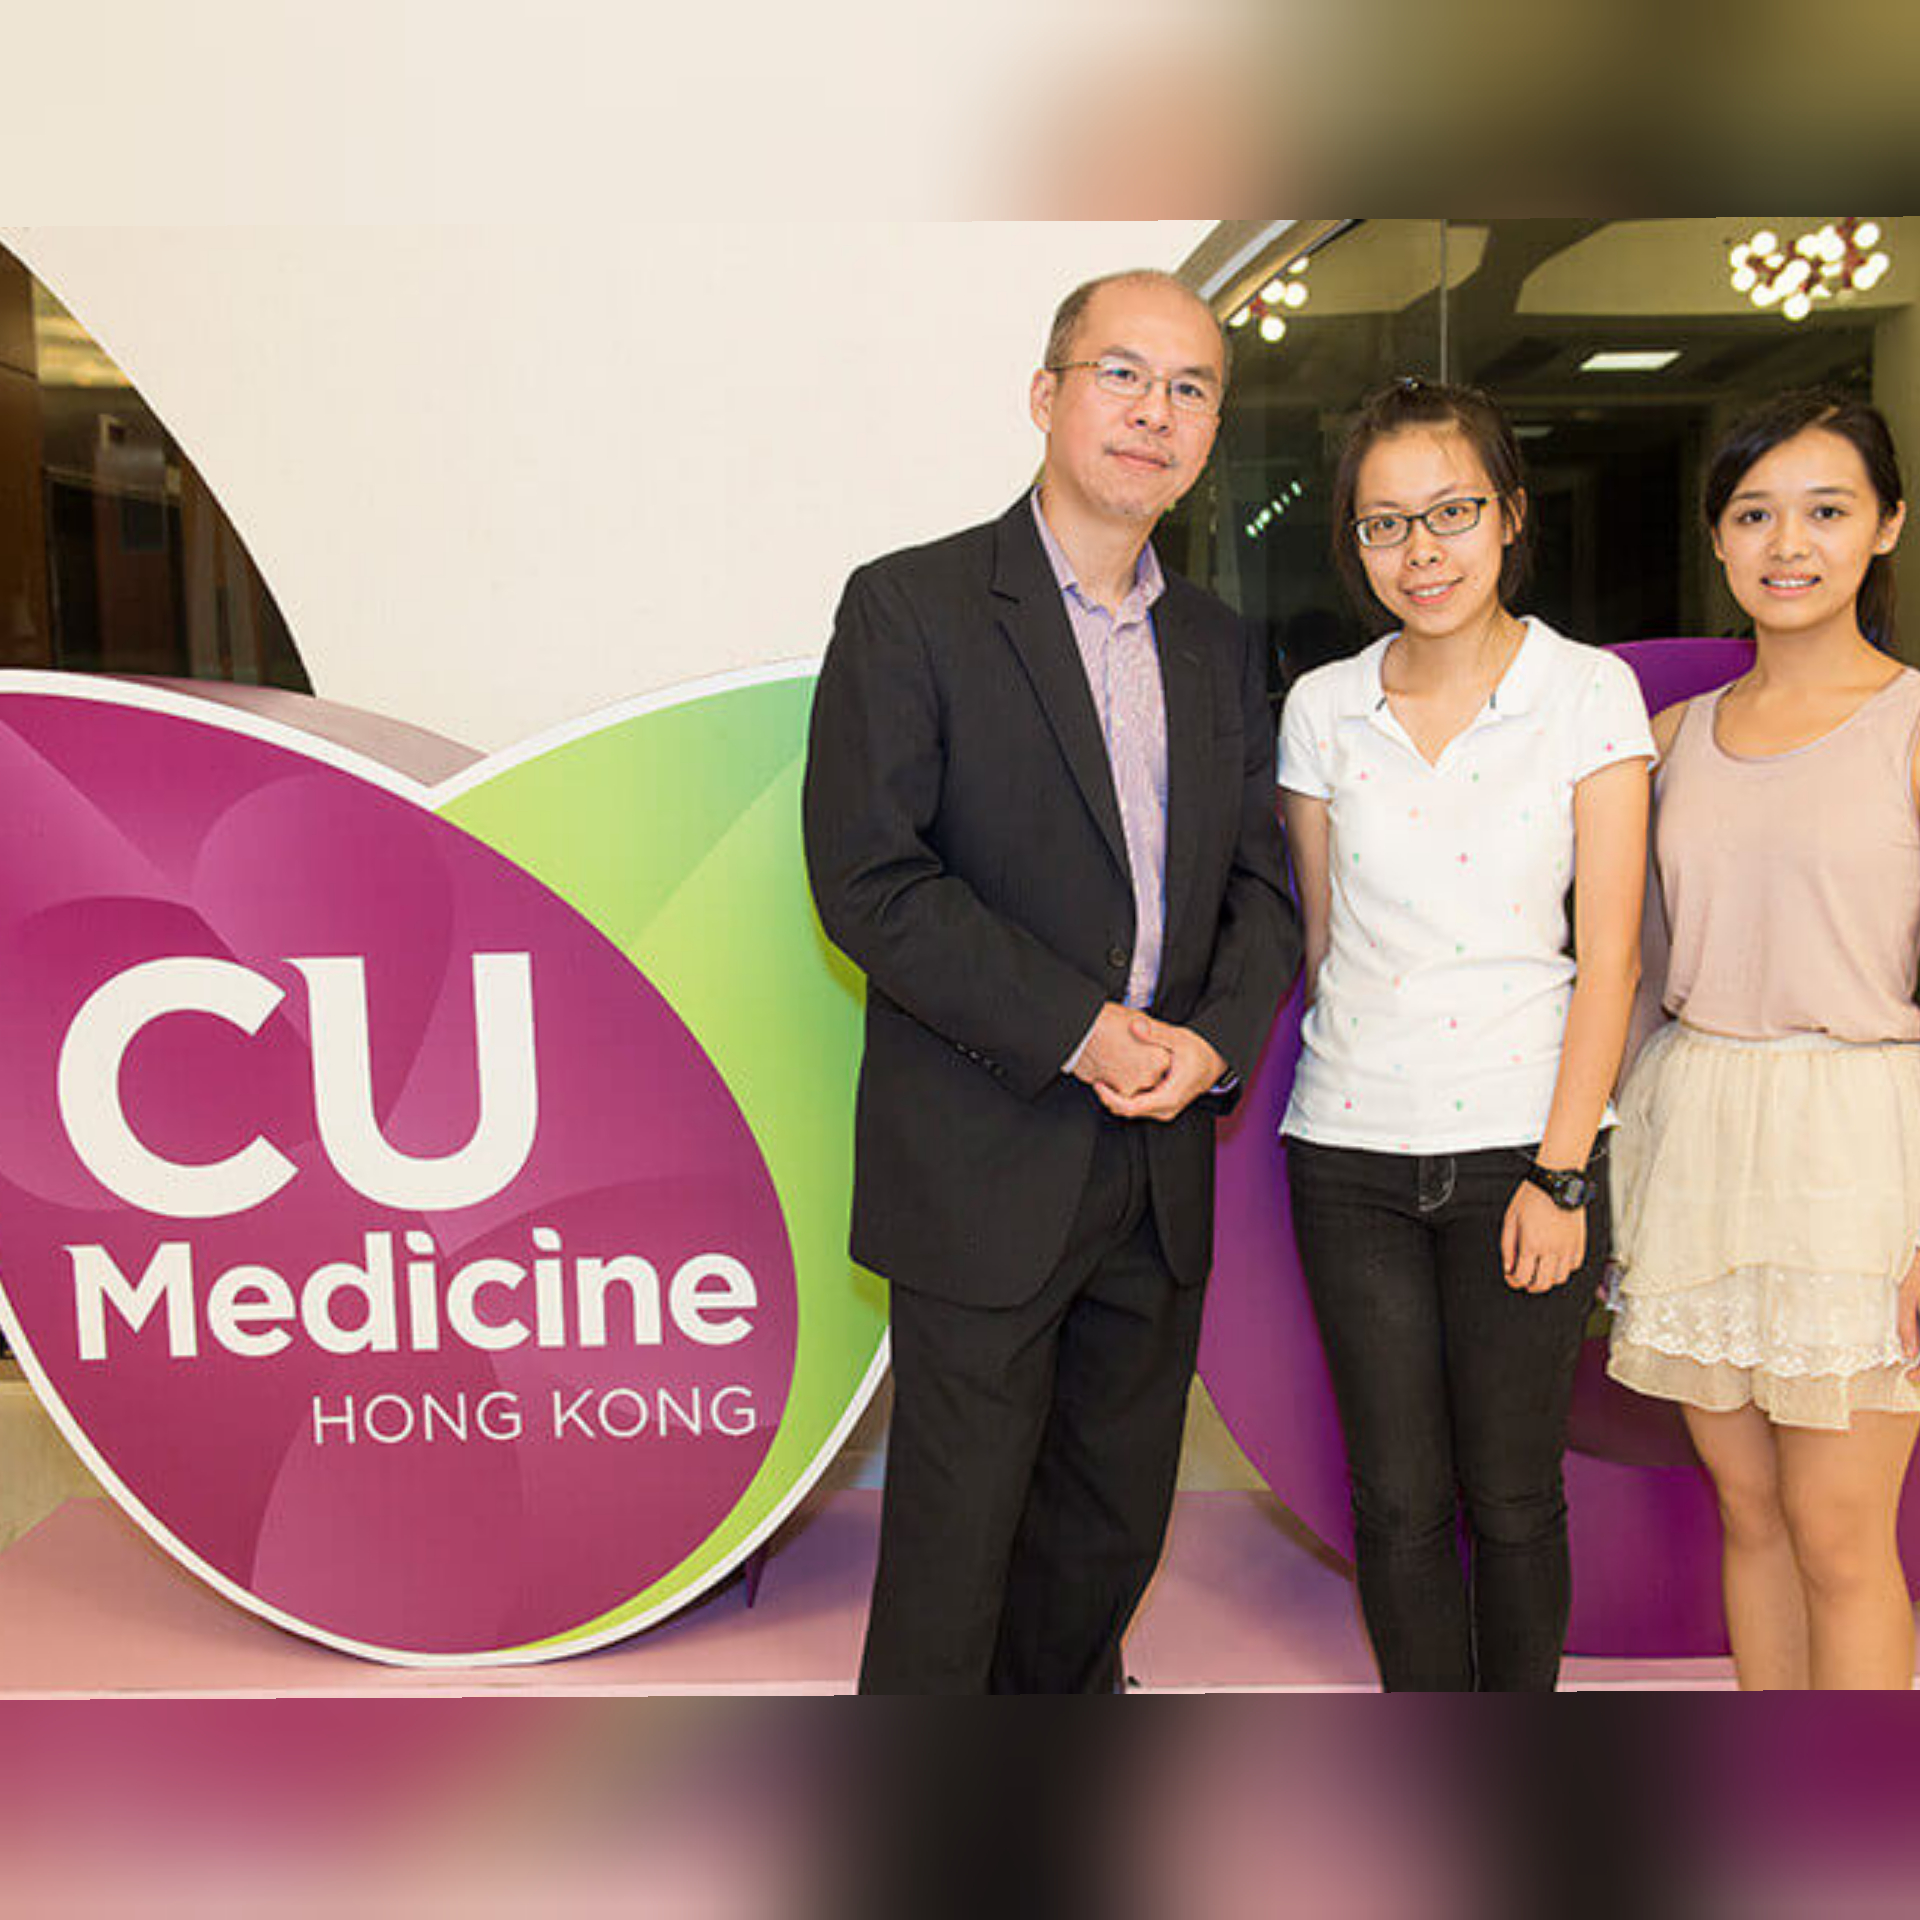 Dr. William CHEUNG, a New York-based private doctor donates HKD1 million to set up scholarship fund for CUHK summer interns.